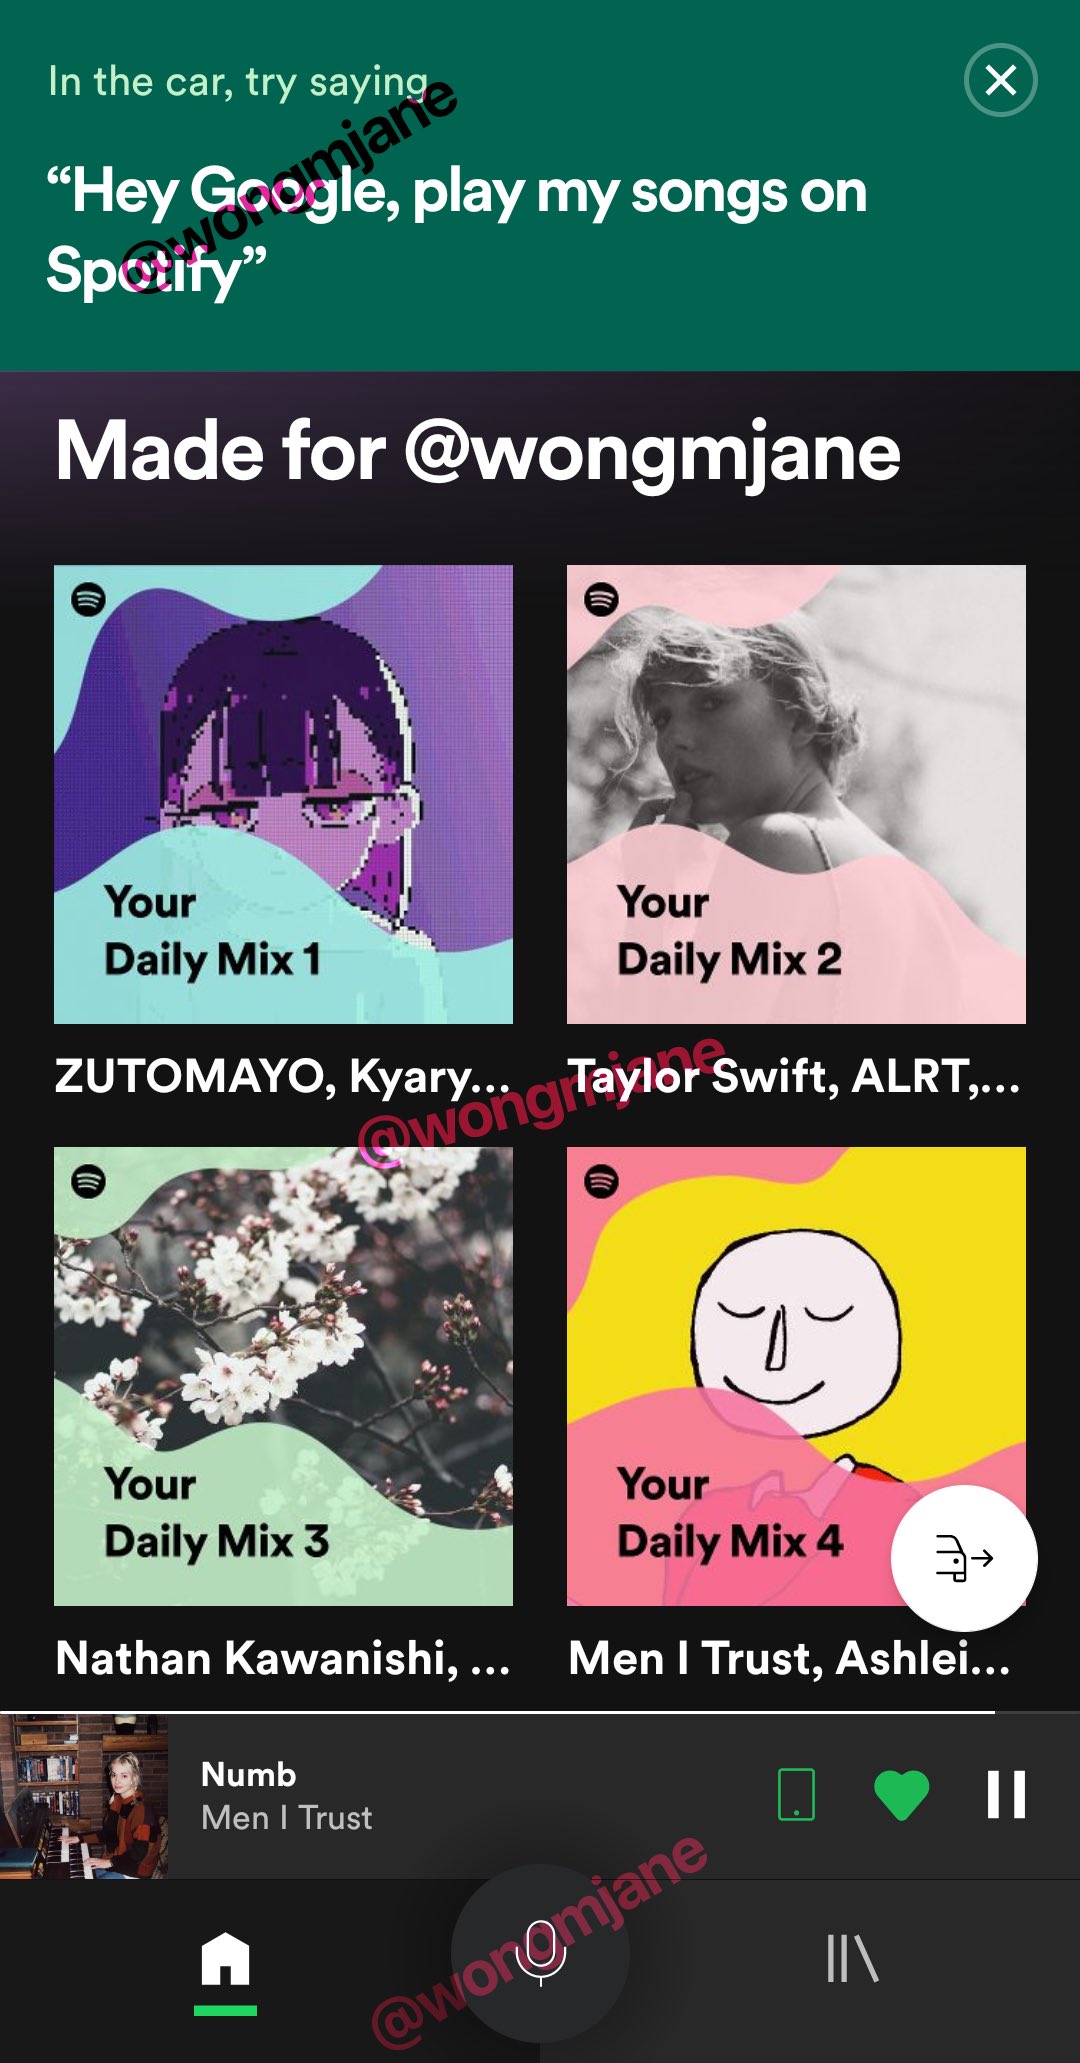 Can you download your daily mix on spotify subscription